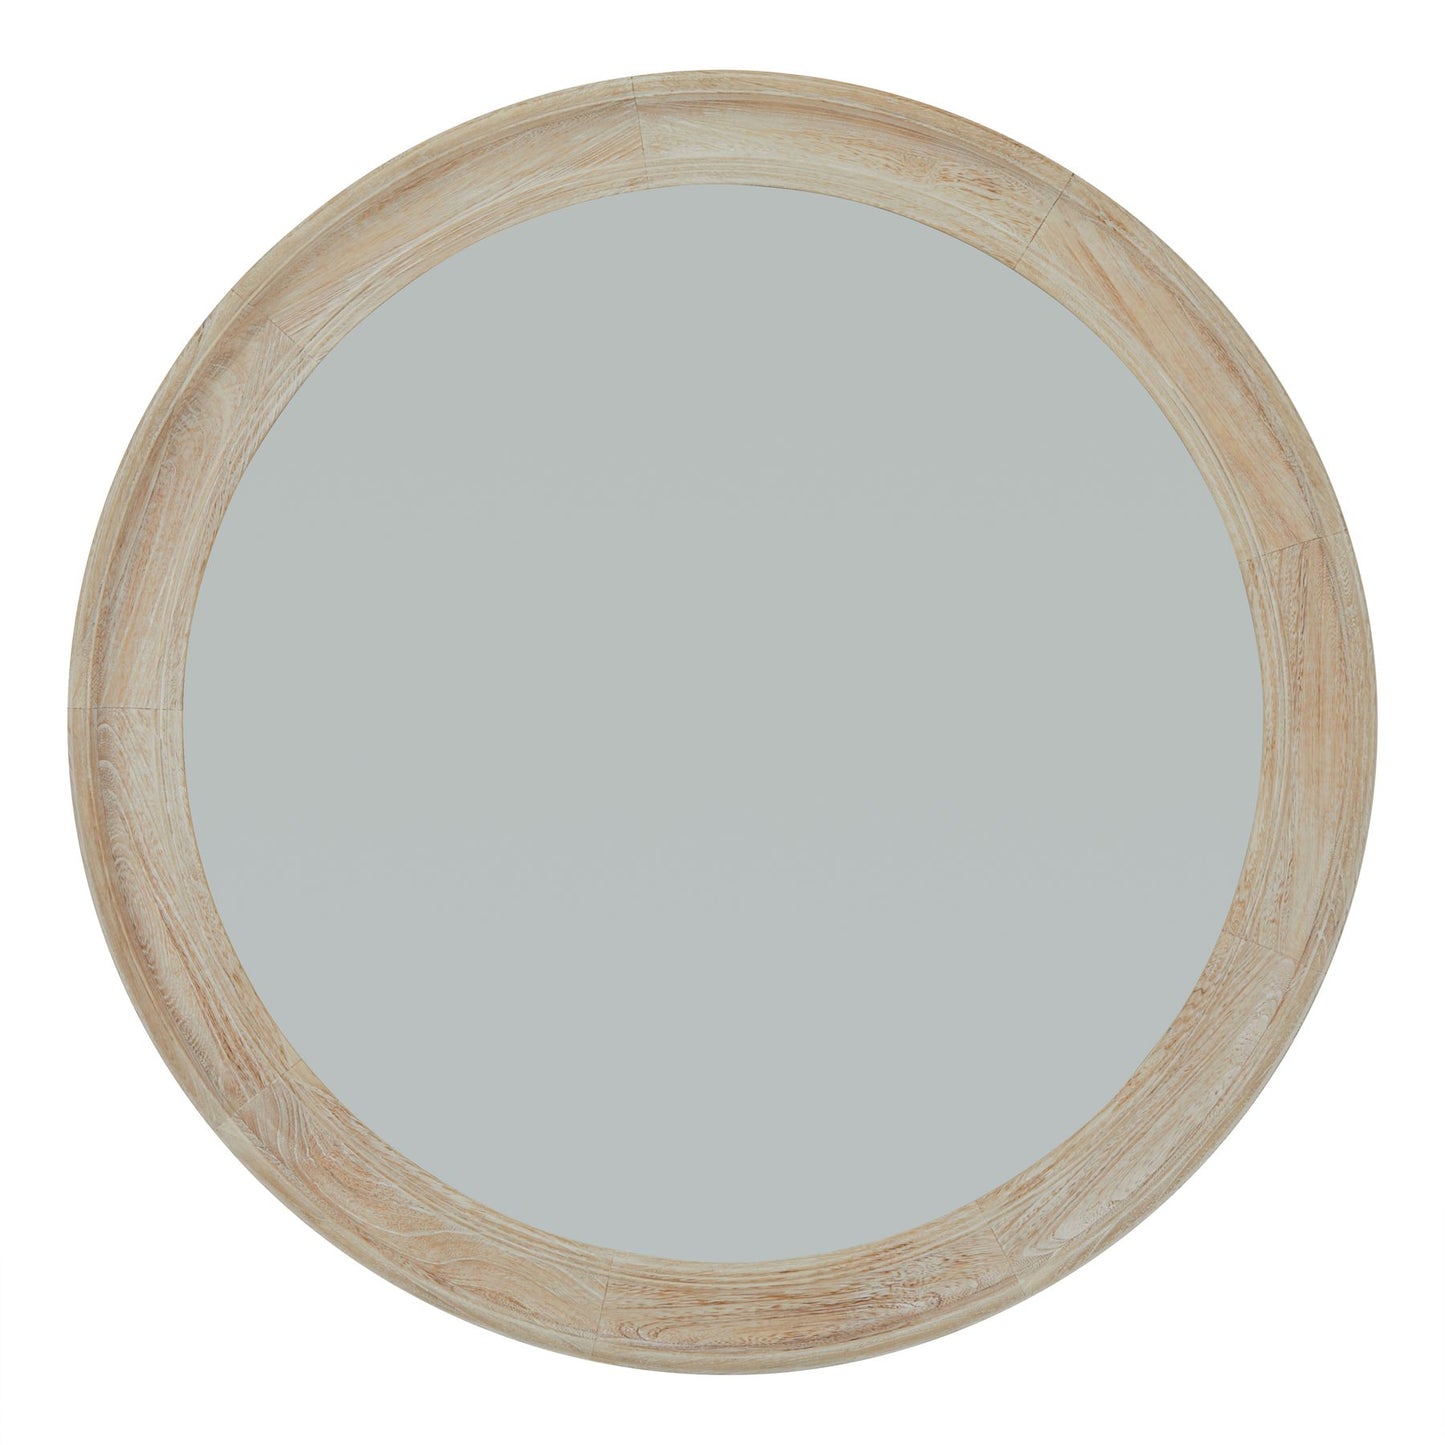 WASHED ROUND WOODEN FRAMED MIRROR (pre order for end of may delivery)